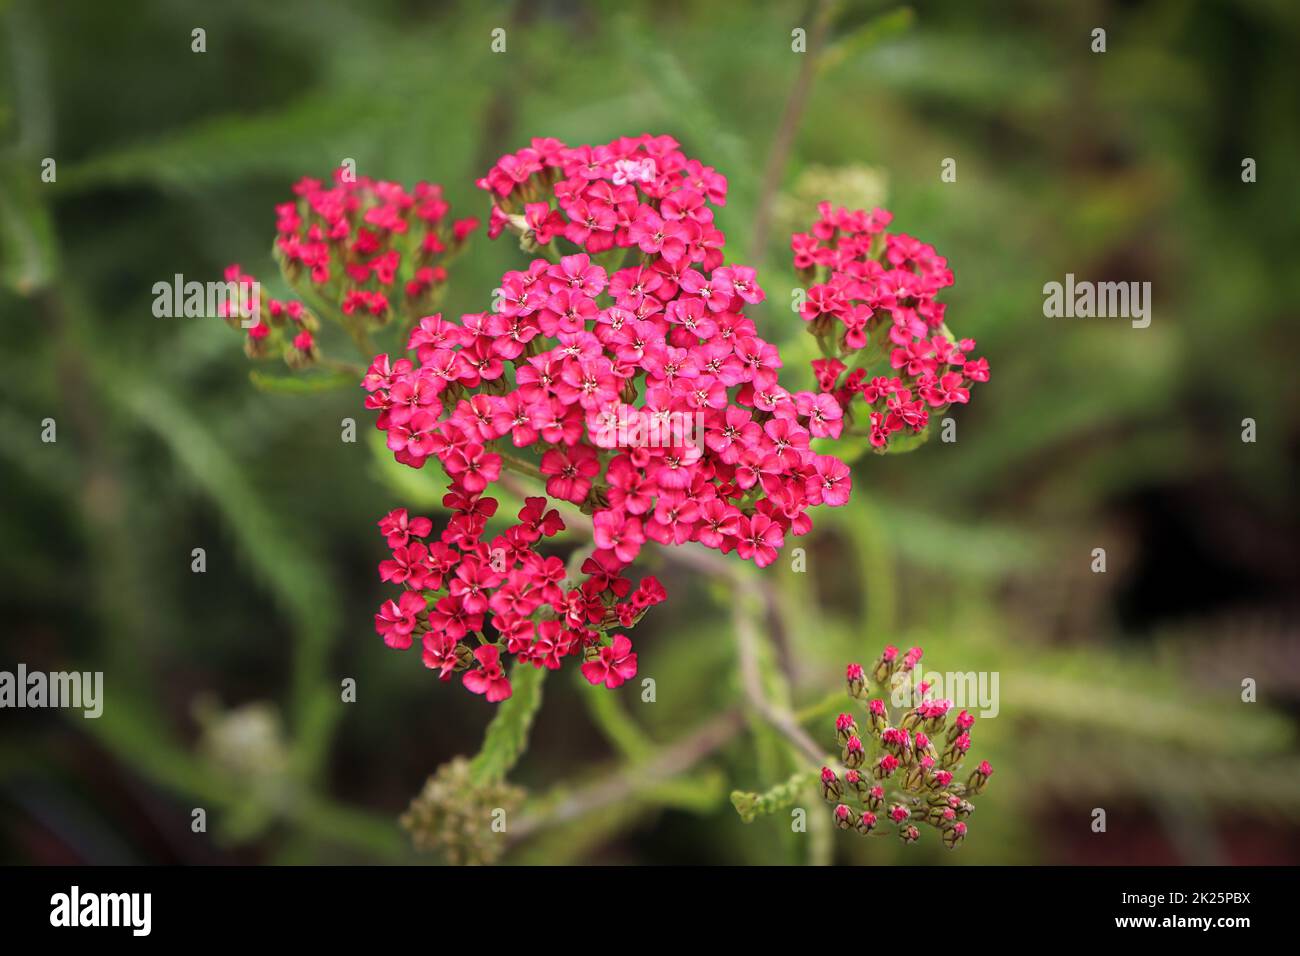 Closeup of Yarrow plant blooming in the garden Stock Photo